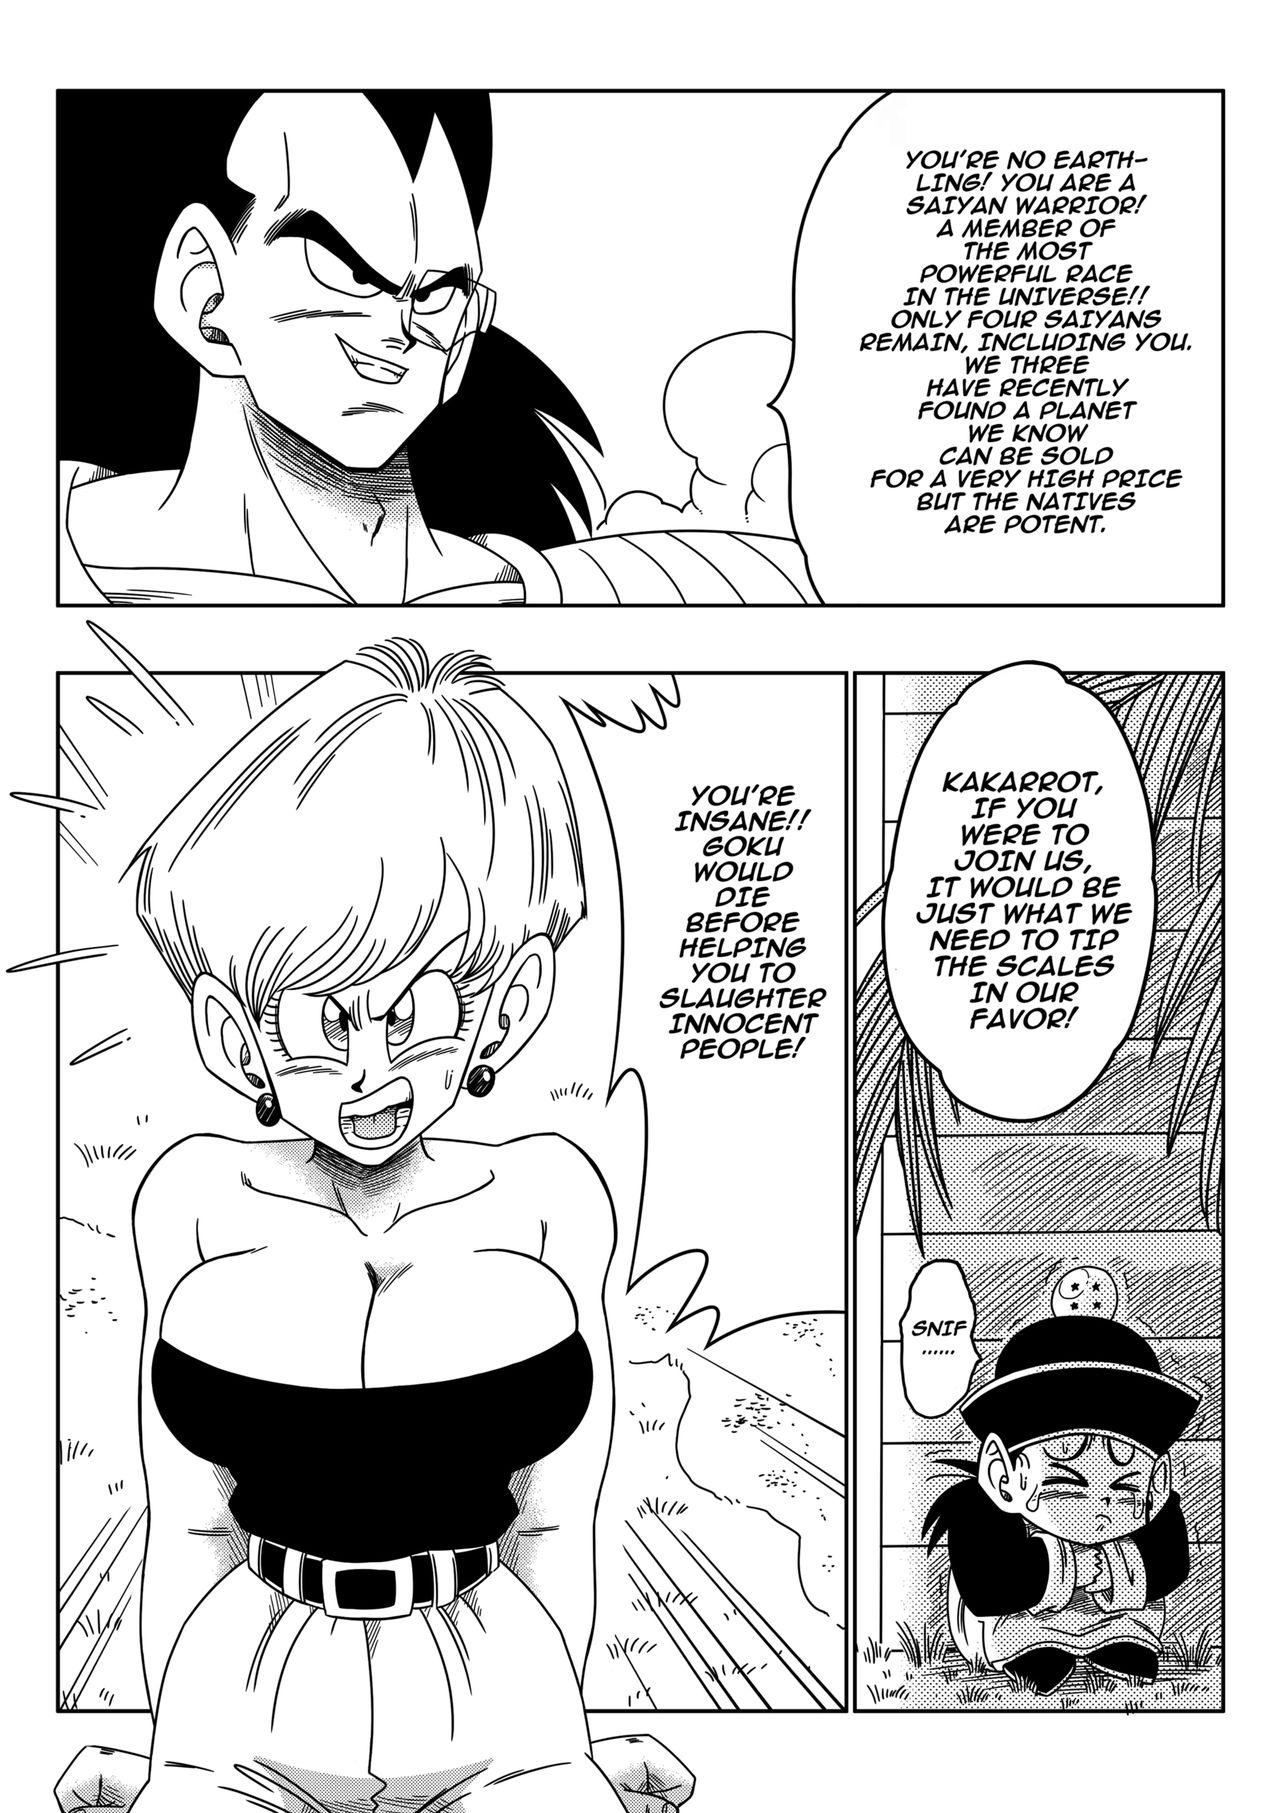 The Evil Brother uncensored Page 5 Of 26 dragon ball z.